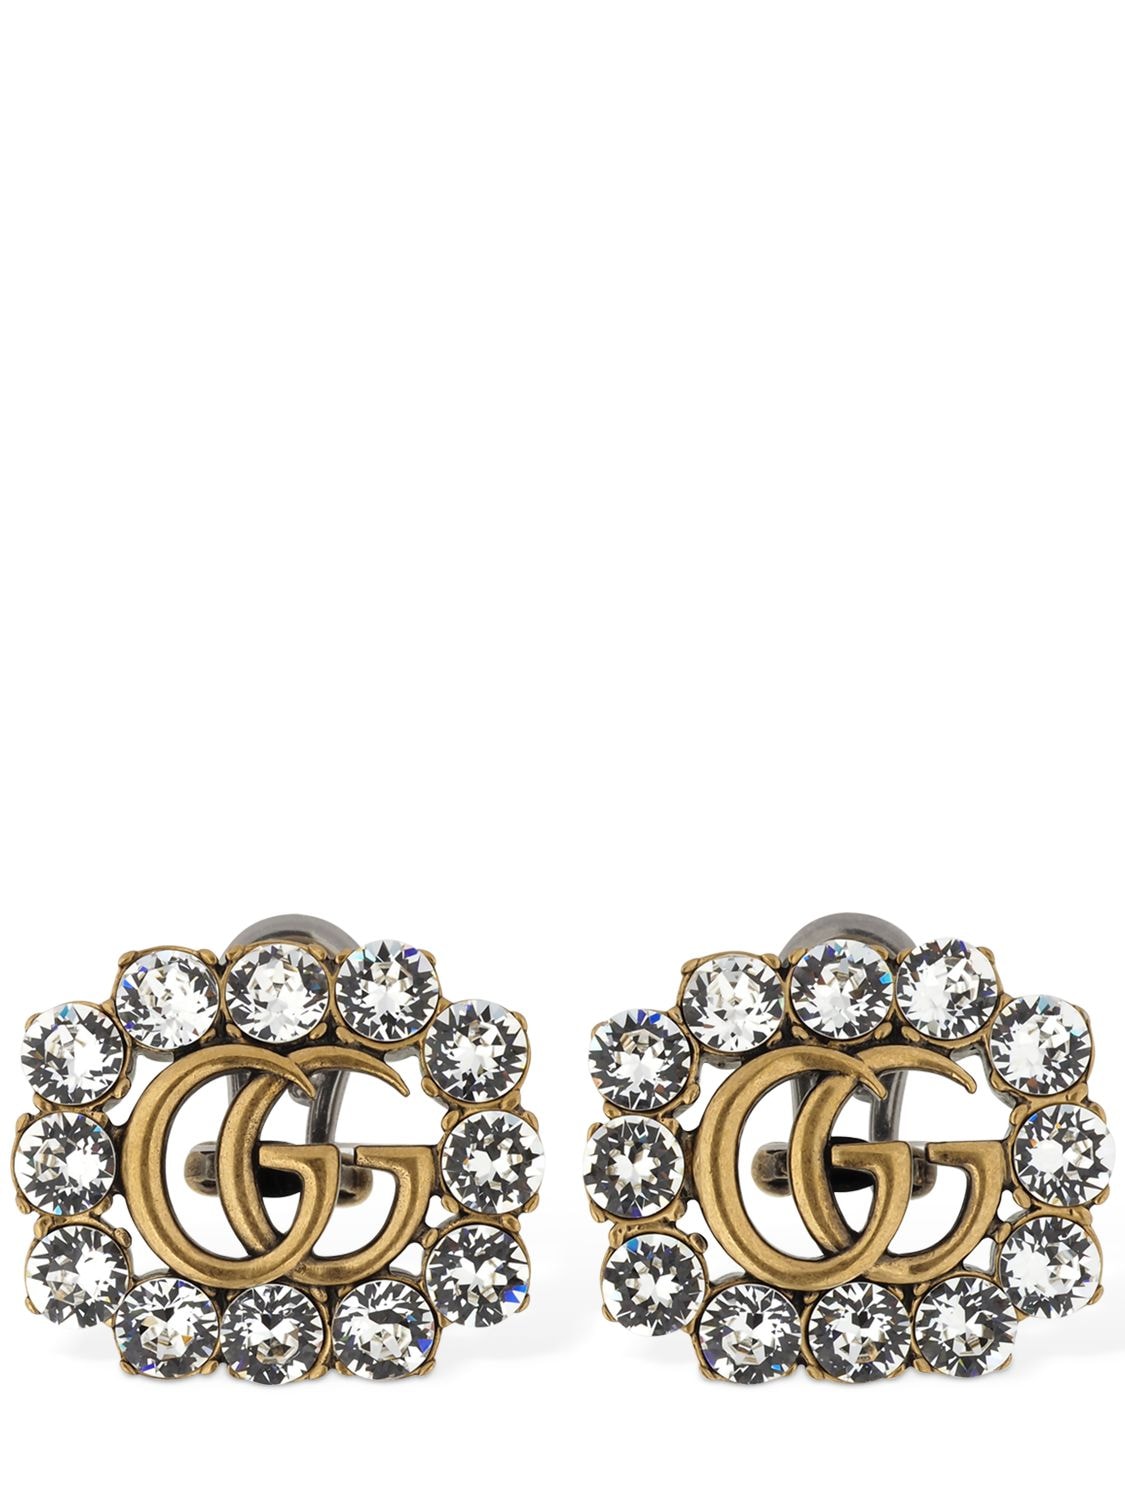 GUCCI GG MARMONT CRYSTAL CLIP-ON EARRINGS,71I80Y022-ODA2NG2